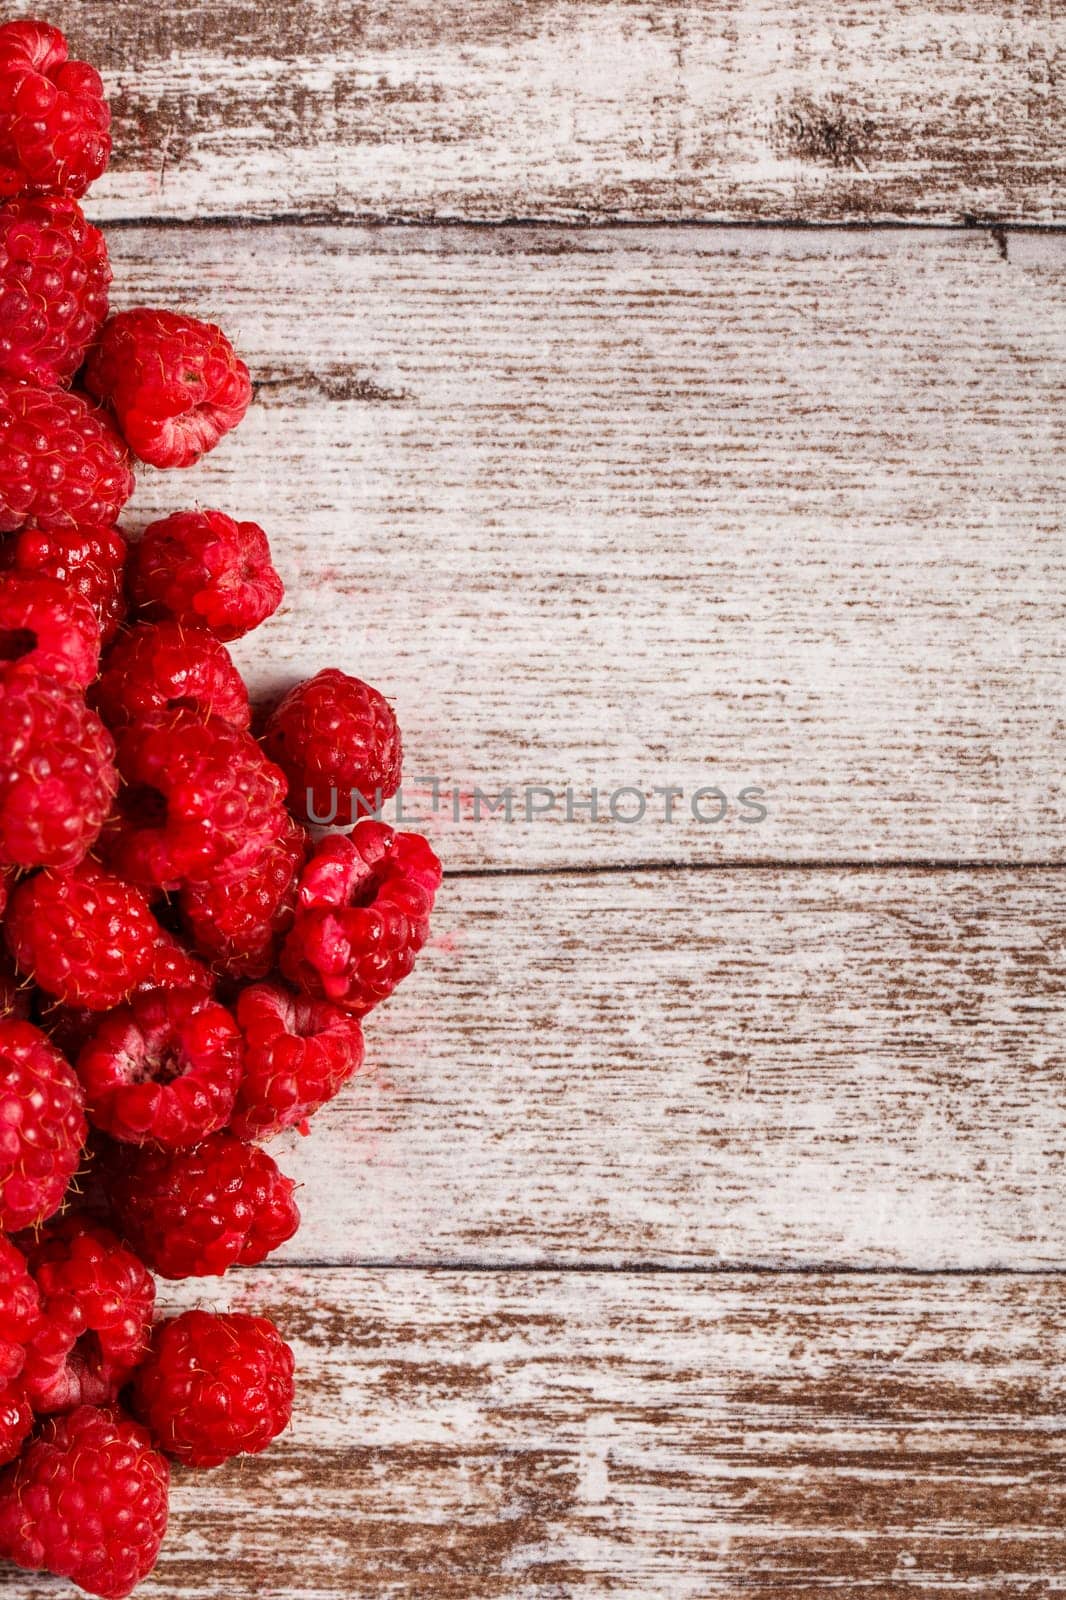 Fresh juicy raspberry on wooden background. Closeup photo. Healthy lifestyle